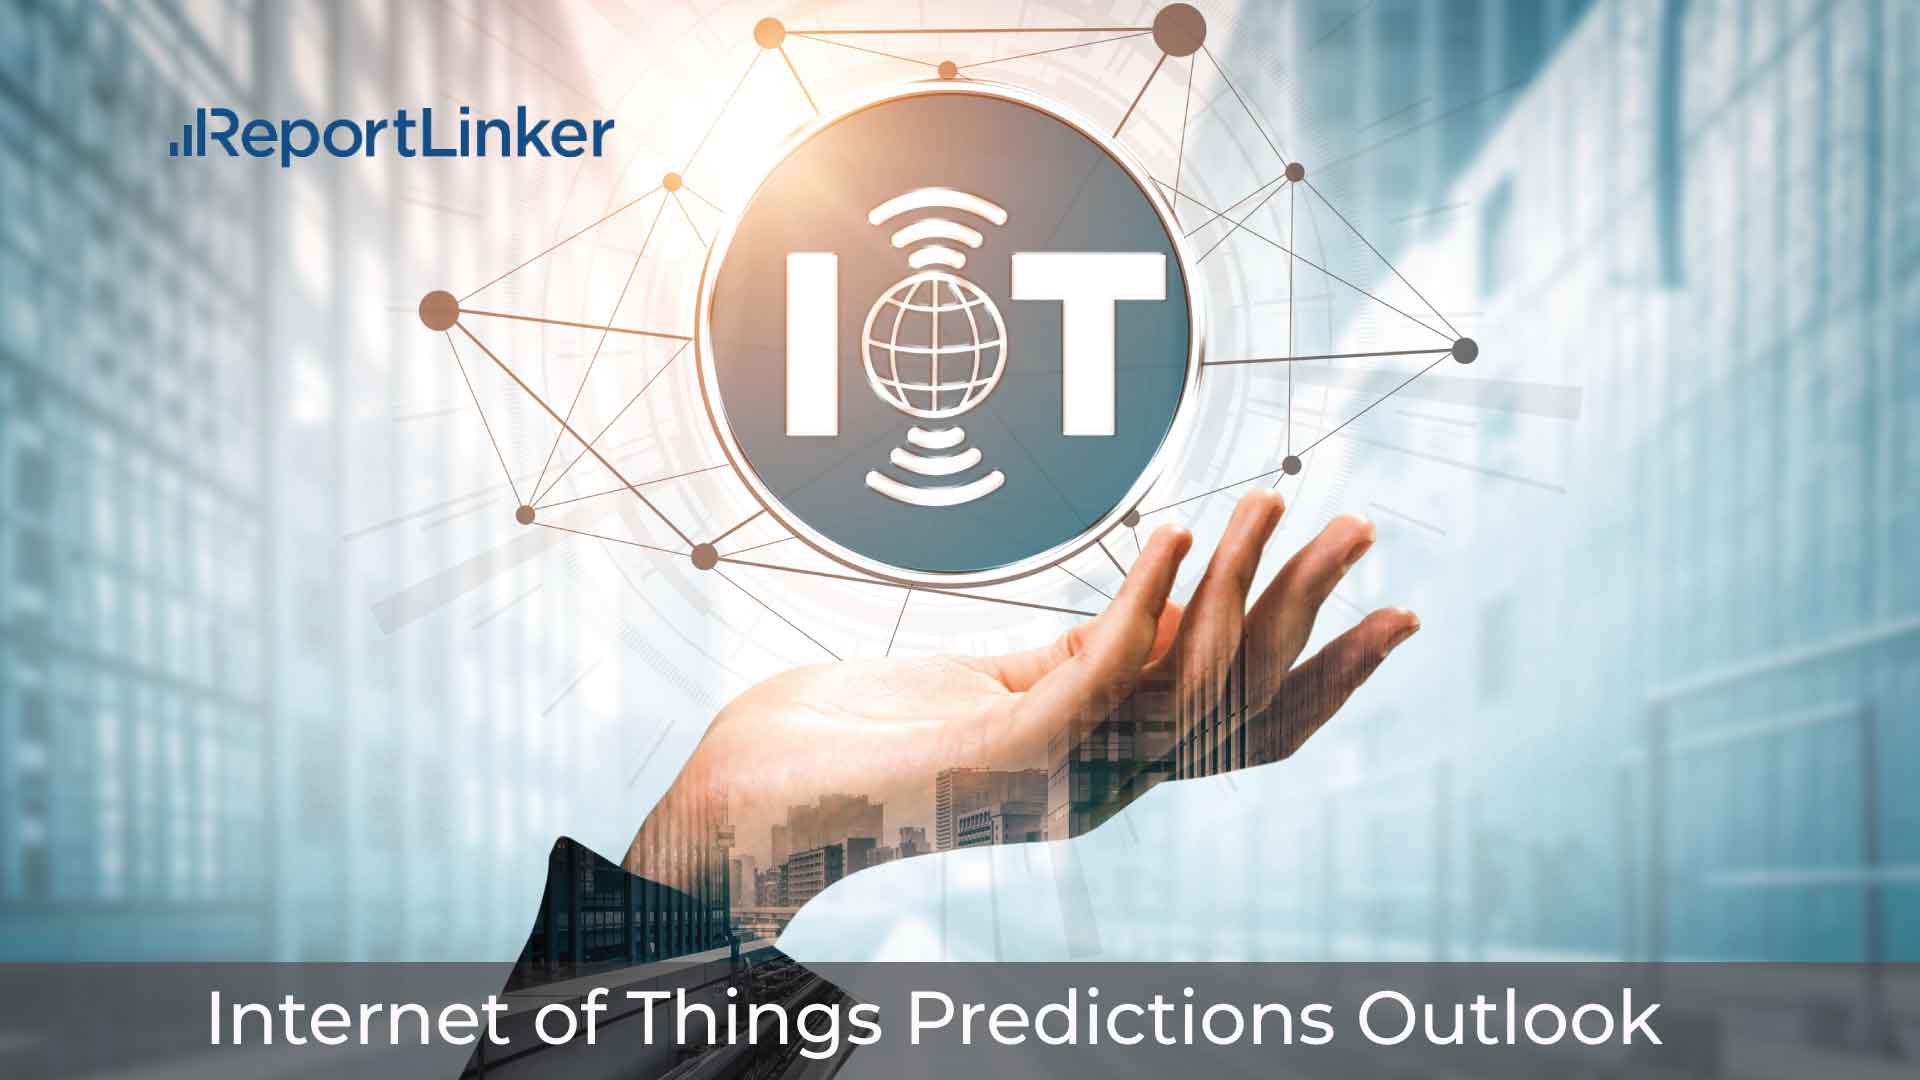 Internet of Things (IoT) Predictions Outlook